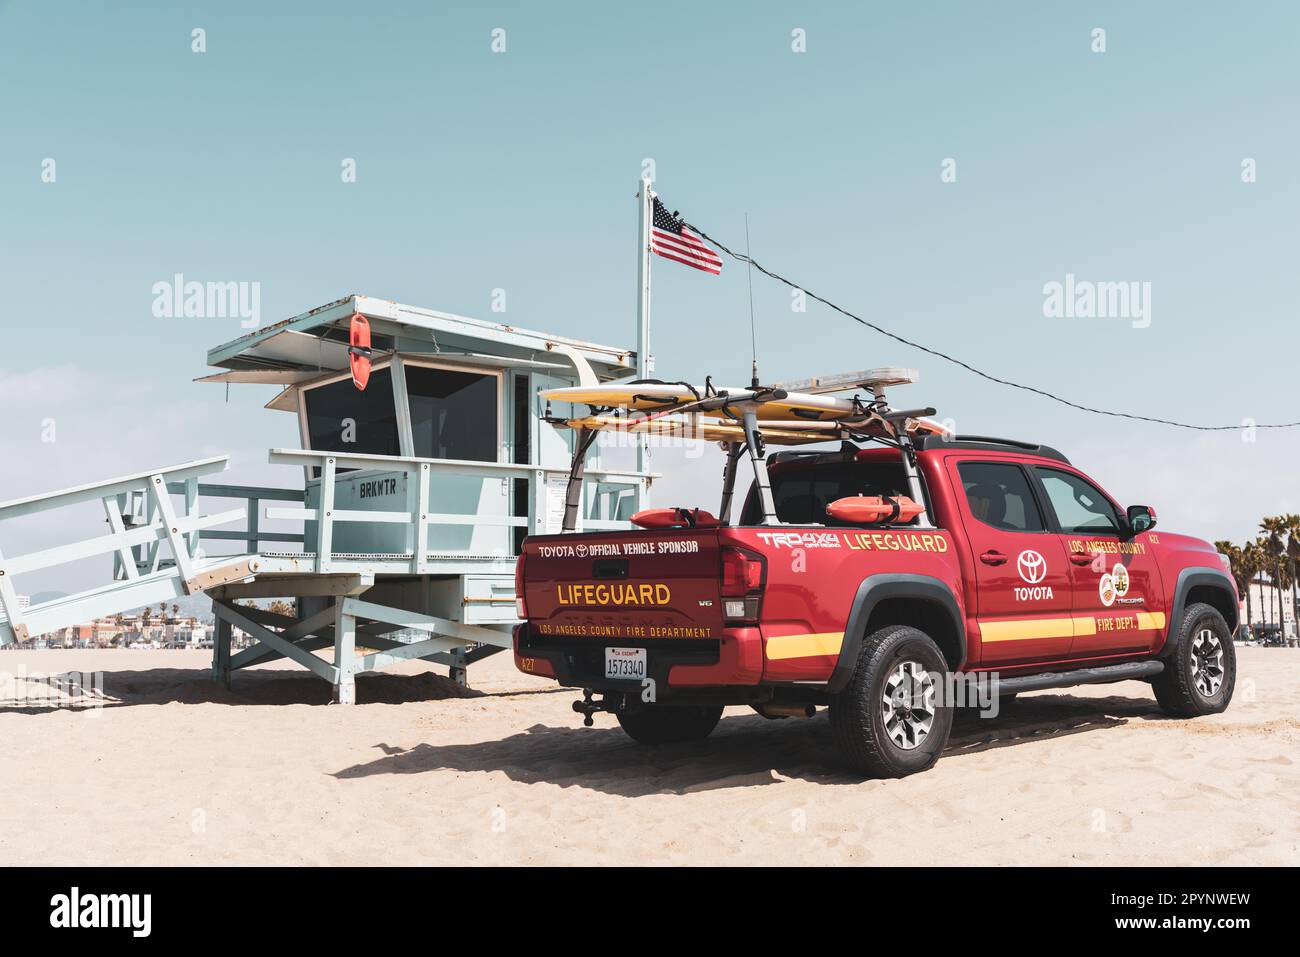 Lifeguard Tower and red lifeguard truck on Venice Beach in Venice, Los Angeles, USA. Rescue and safety. Beach in Southern California. Stock Photo